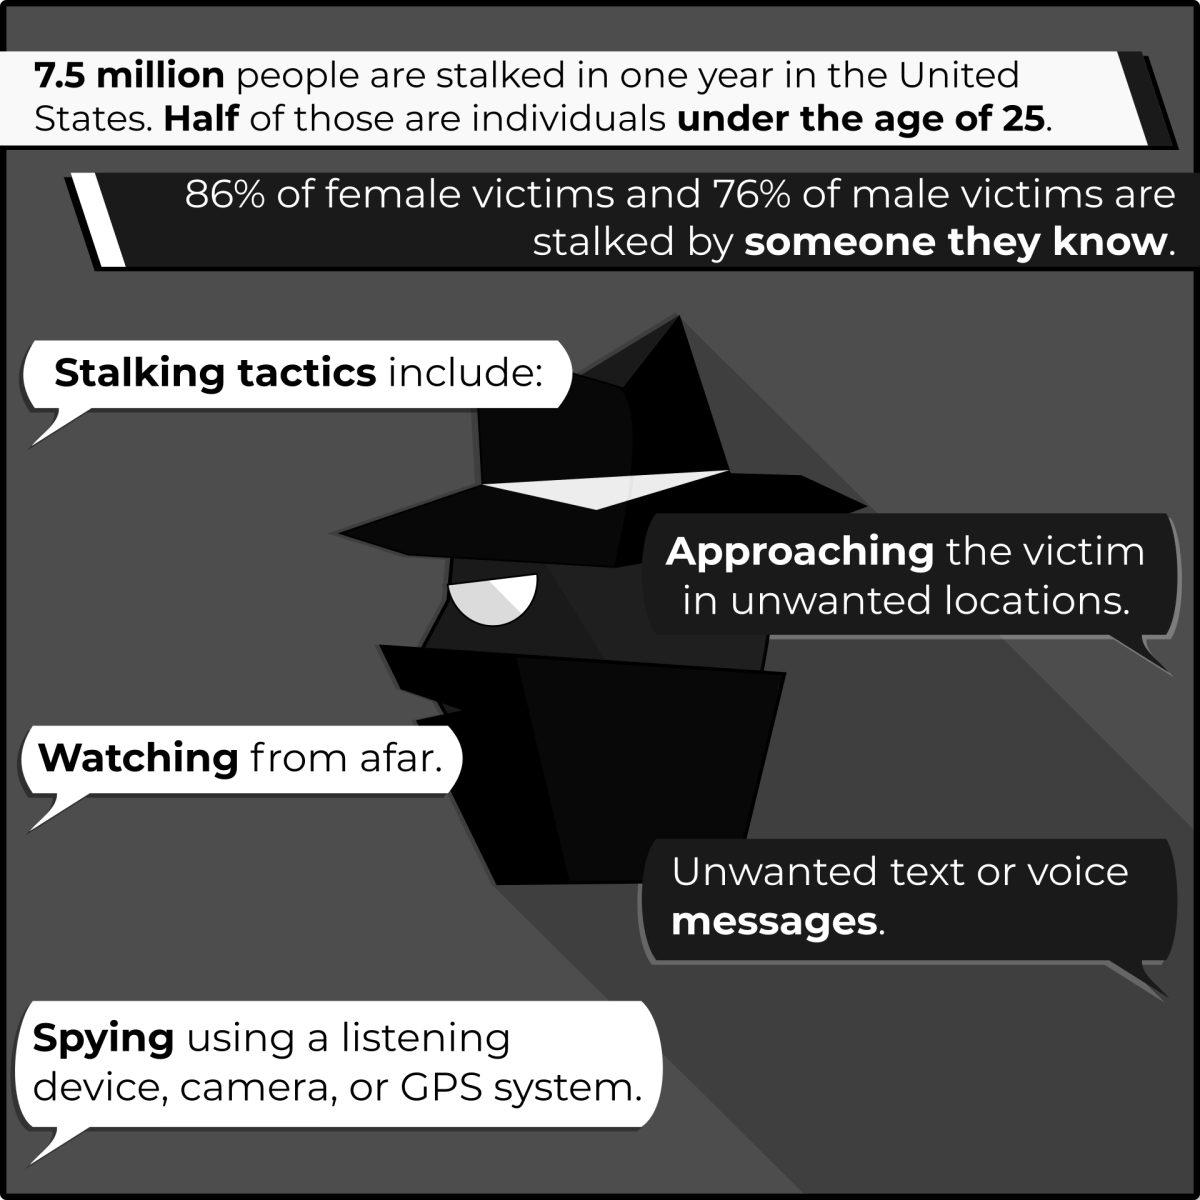 The Texas A&M Health Promotion office teaches students about warning signs to watch for when it comes to stalking.